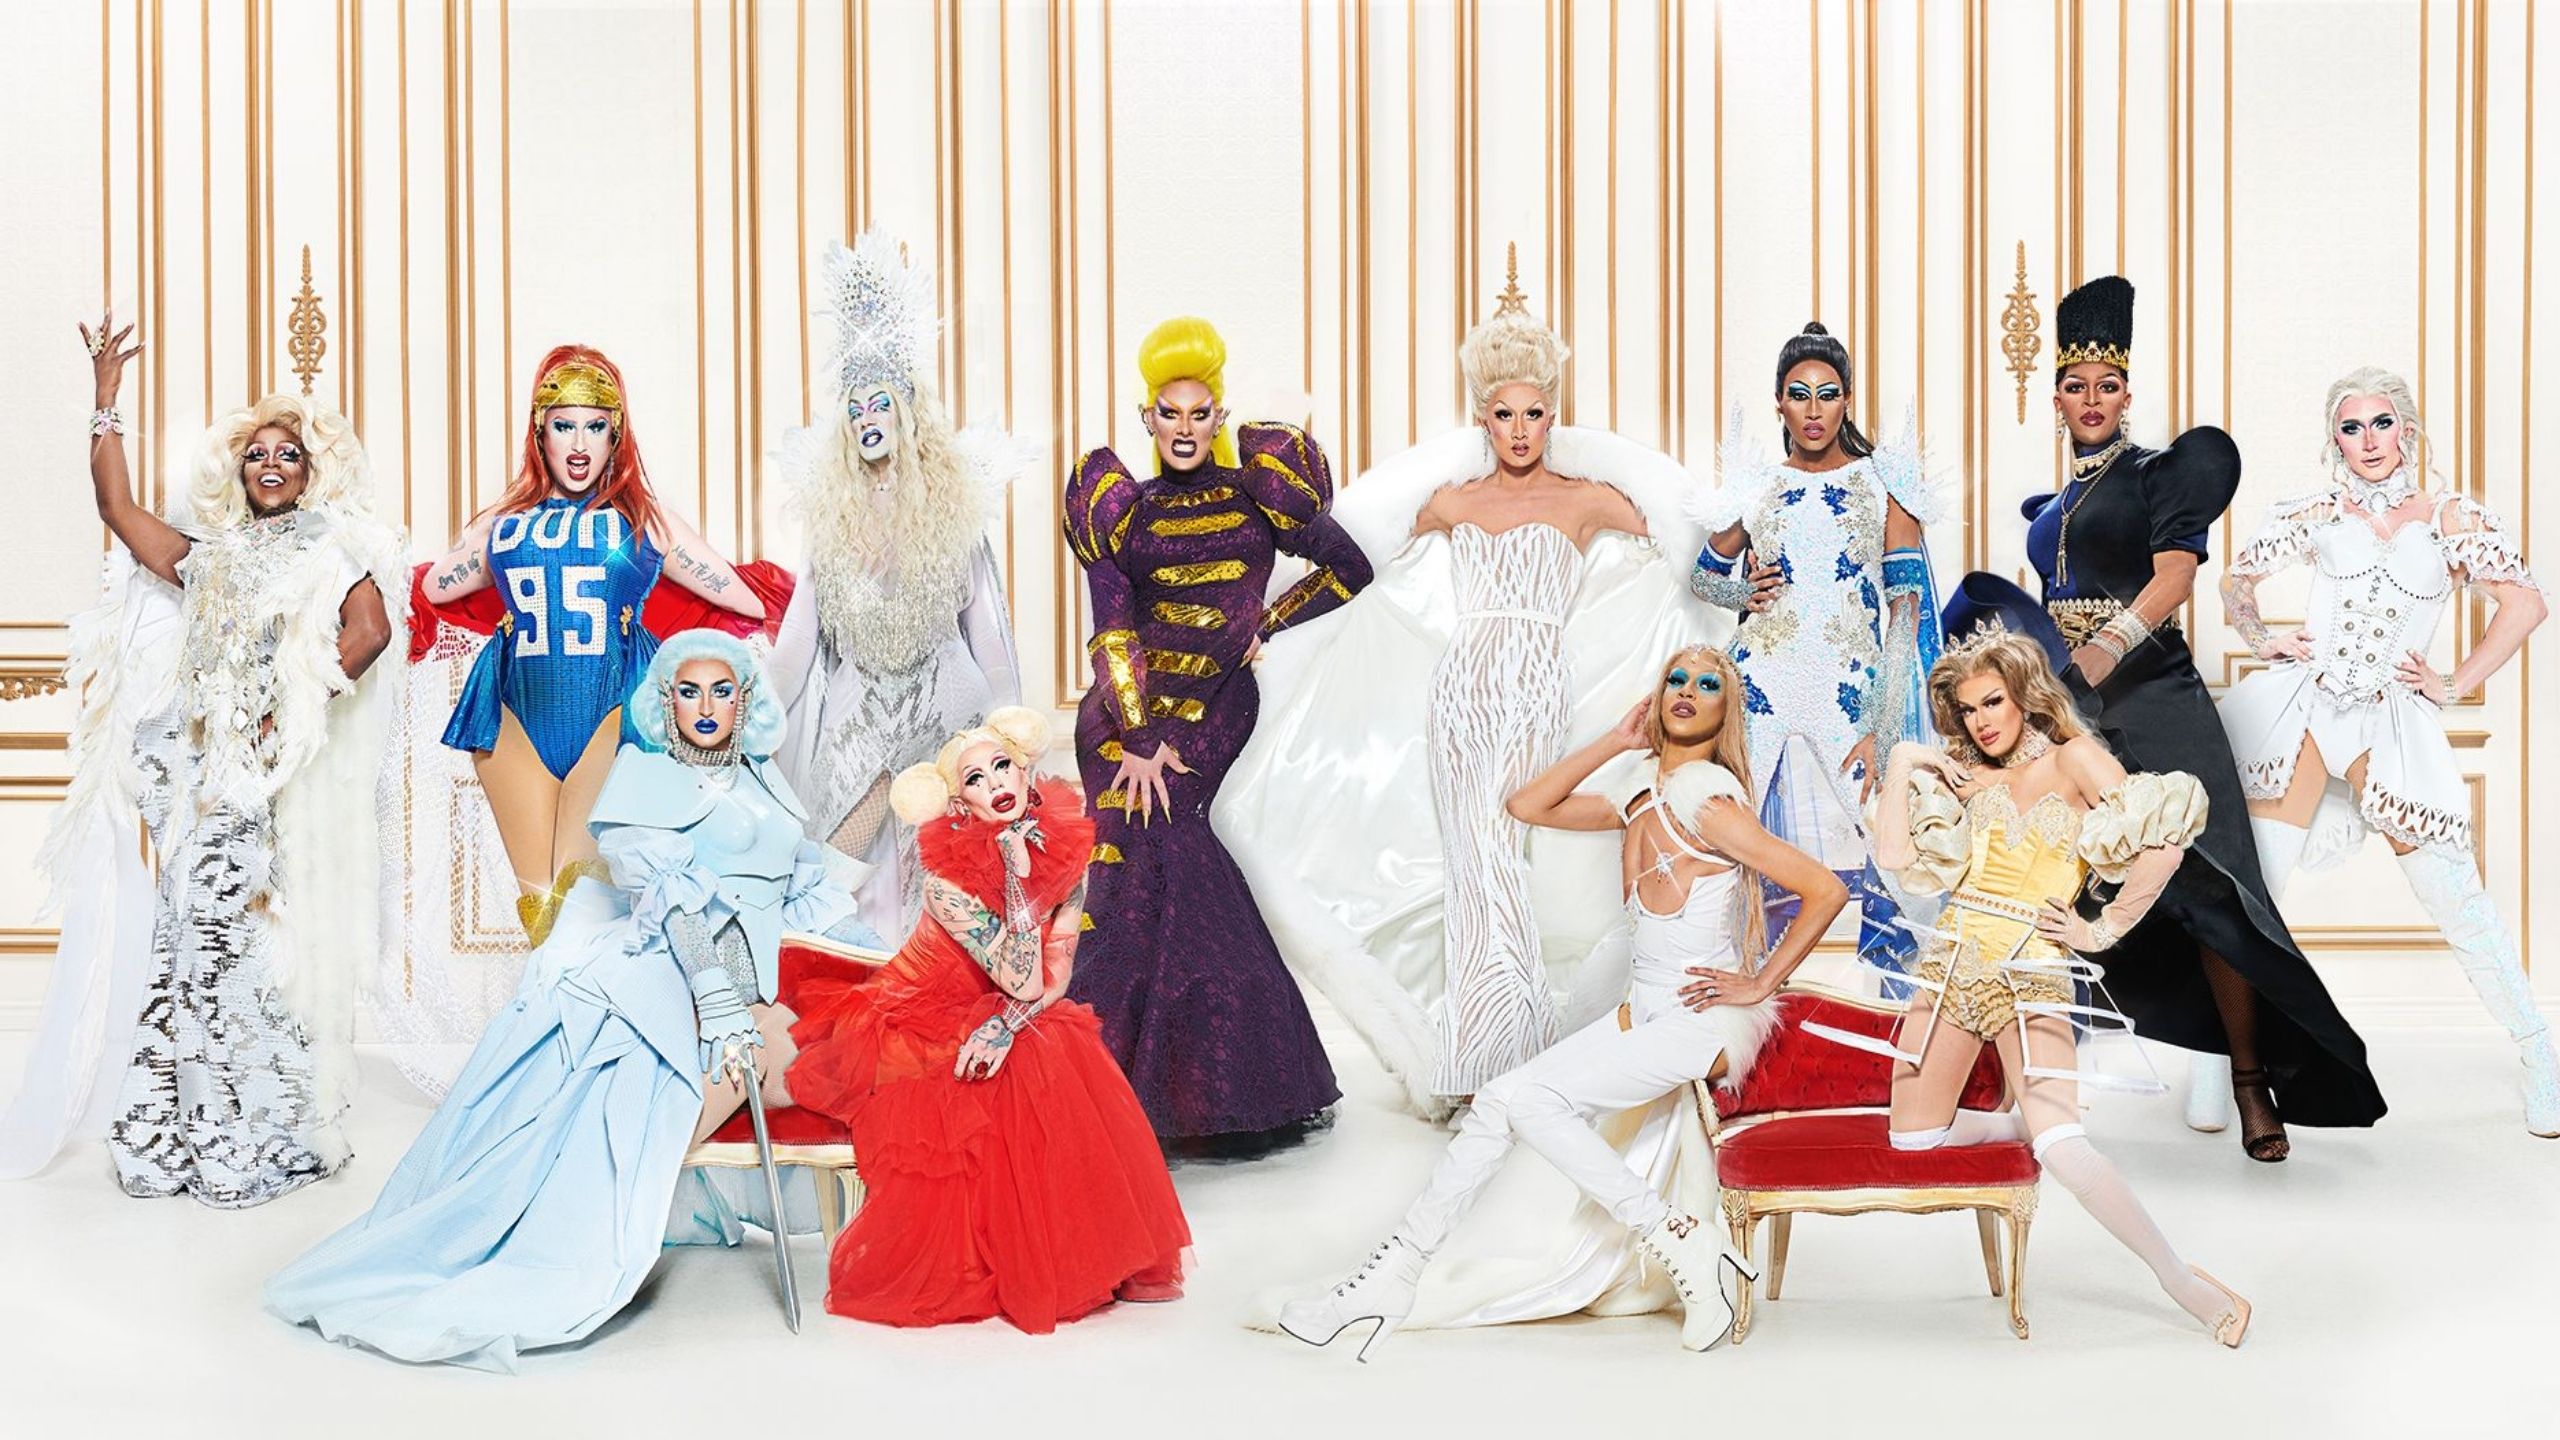 'Canada's Drag Race' season 1 promo photo with queens standing